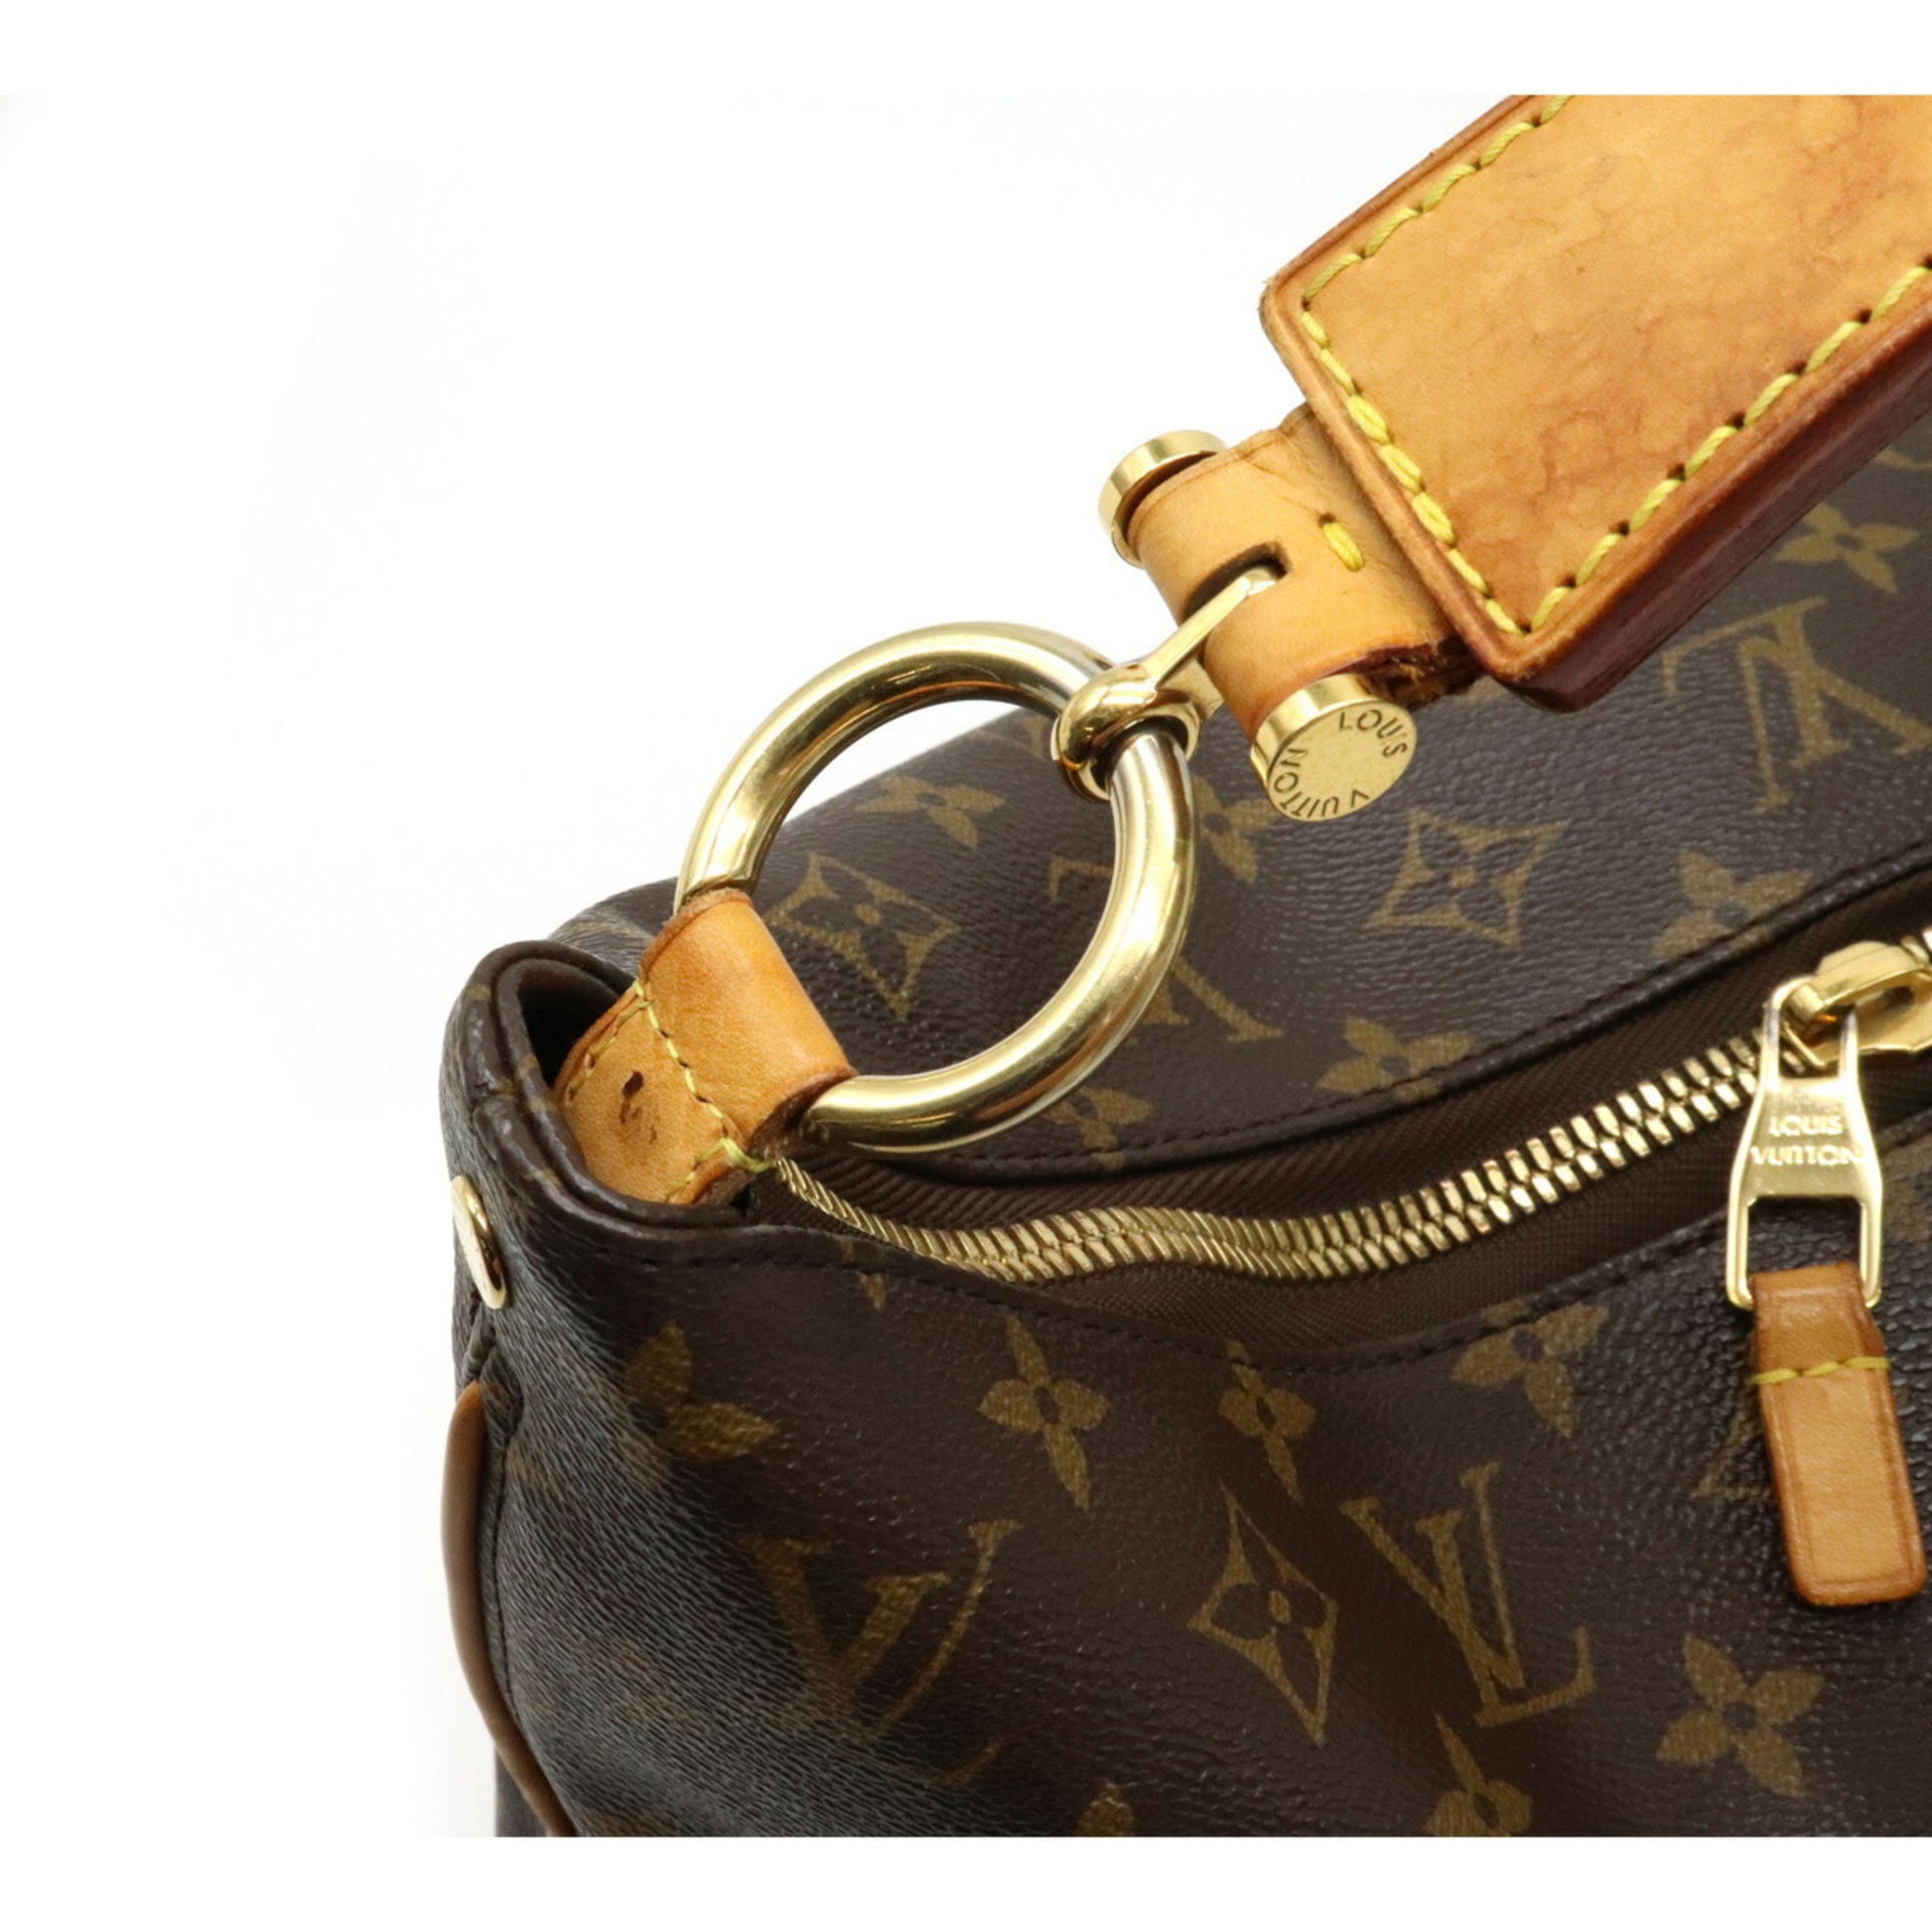 Buy Free Shipping [Used] LOUIS VUITTON Shoulder Bag Shri PM Monogram M40586  from Japan - Buy authentic Plus exclusive items from Japan